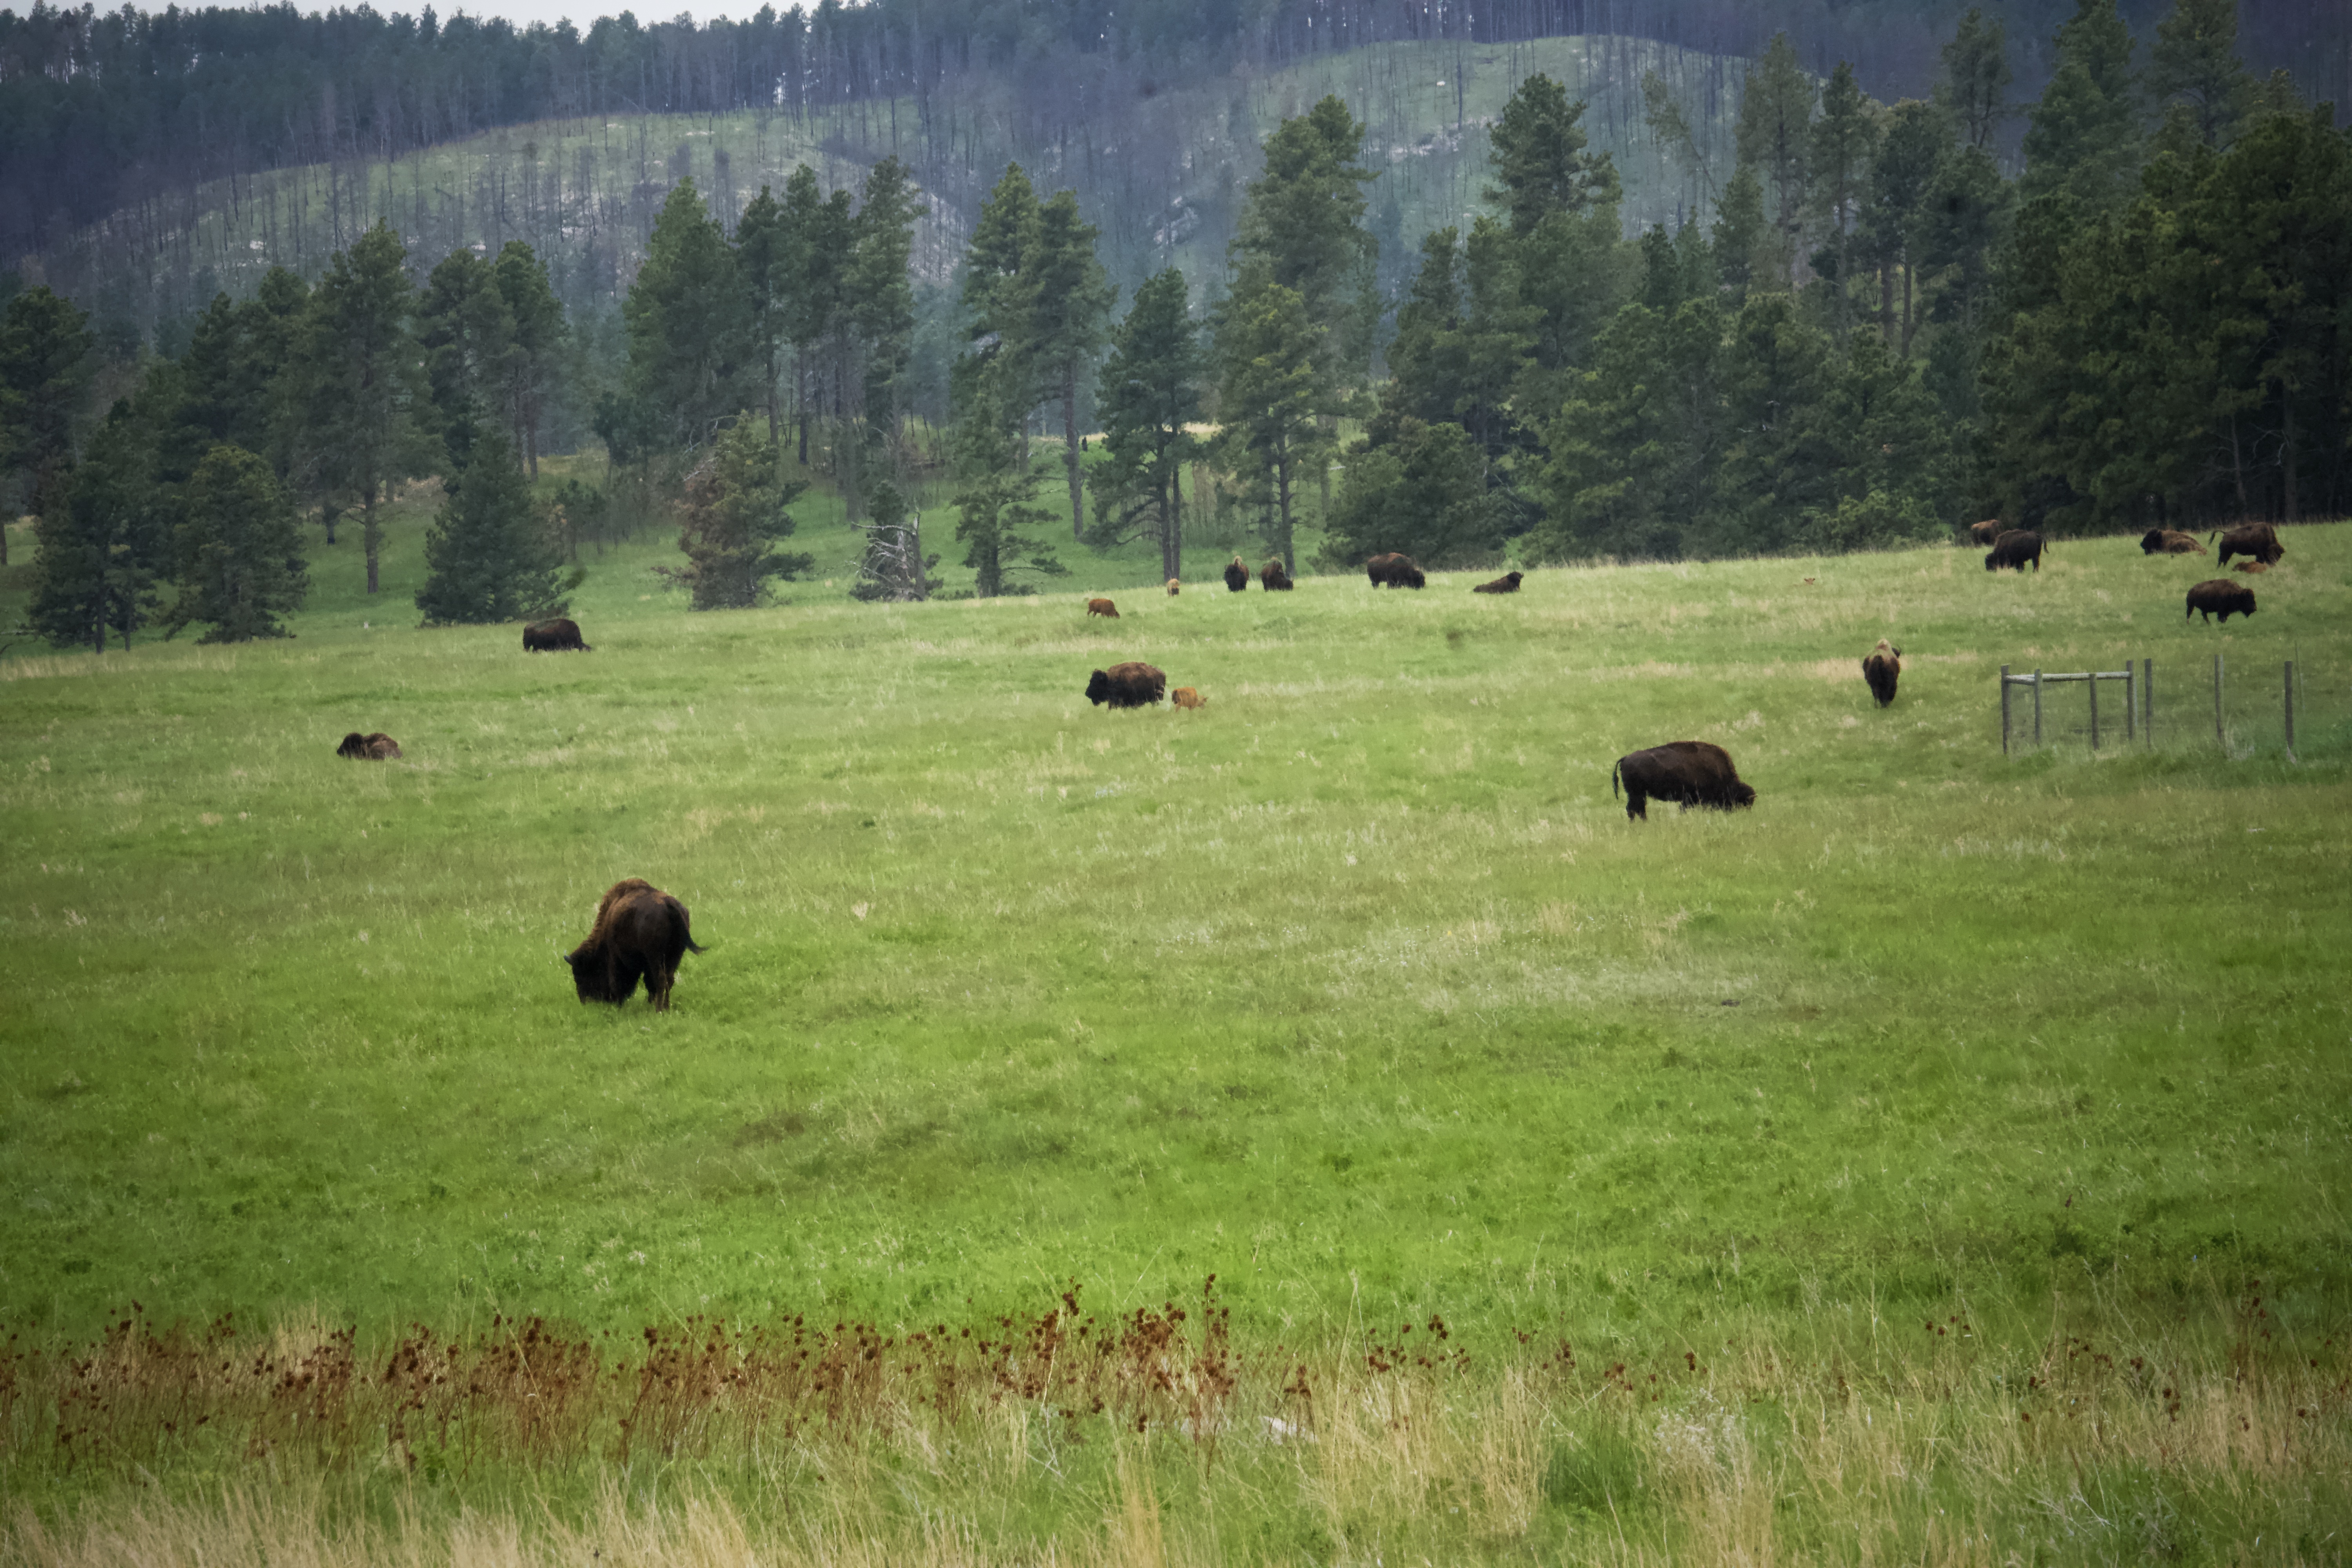 Buffalo herd in a field at Custer State Park